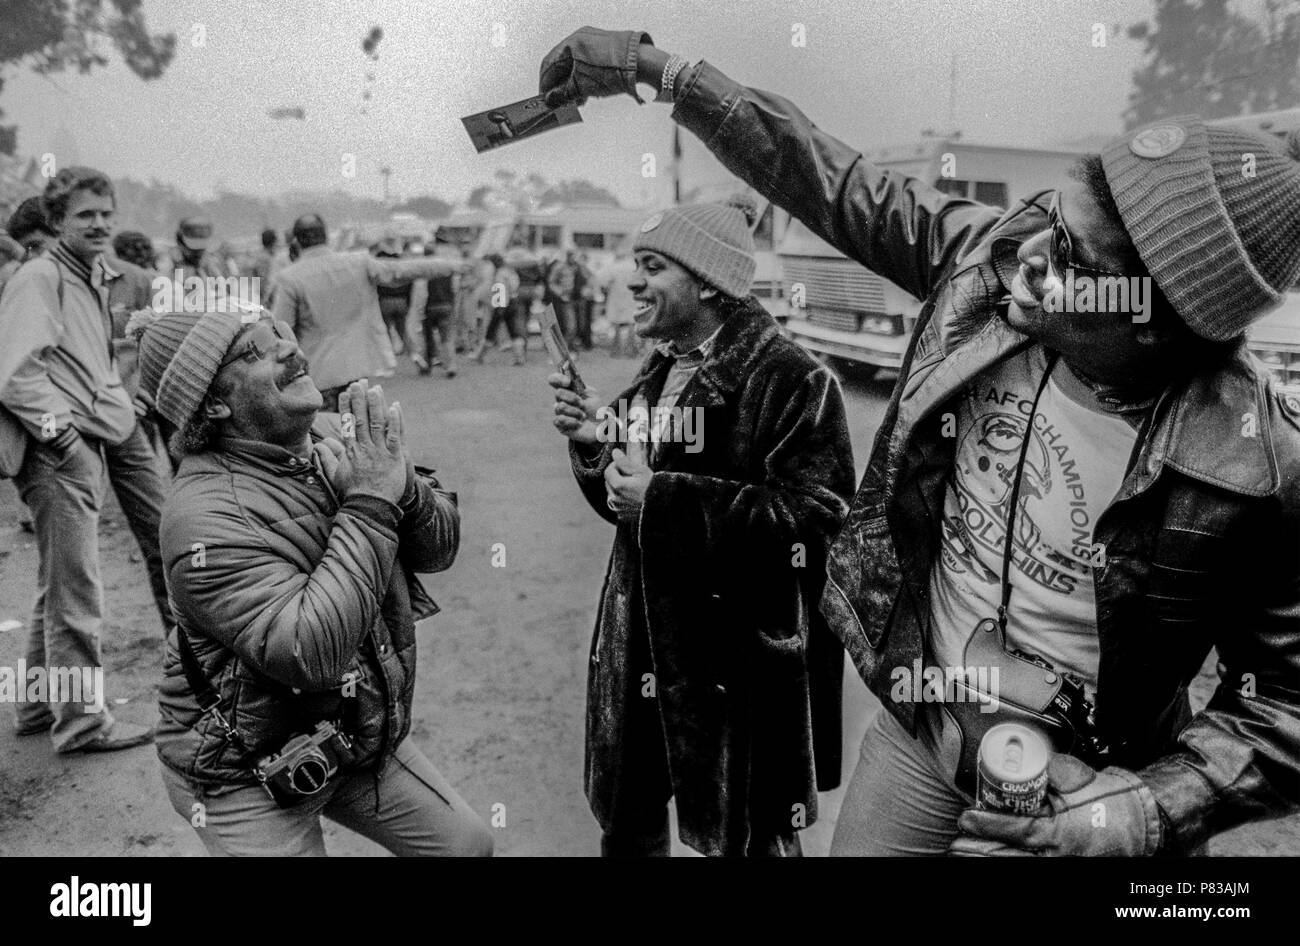 Stanford, California, USA. 20th Jan, 1985. Fans play games with tickets at the Super Bowl XIX tailgate on the Stanford University campus. The San Francisco 49ers defeated the Miami Dolphins 38-16 on Sunday, January 20, 1985. Credit: Al Golub/ZUMA Wire/Alamy Live News Stock Photo